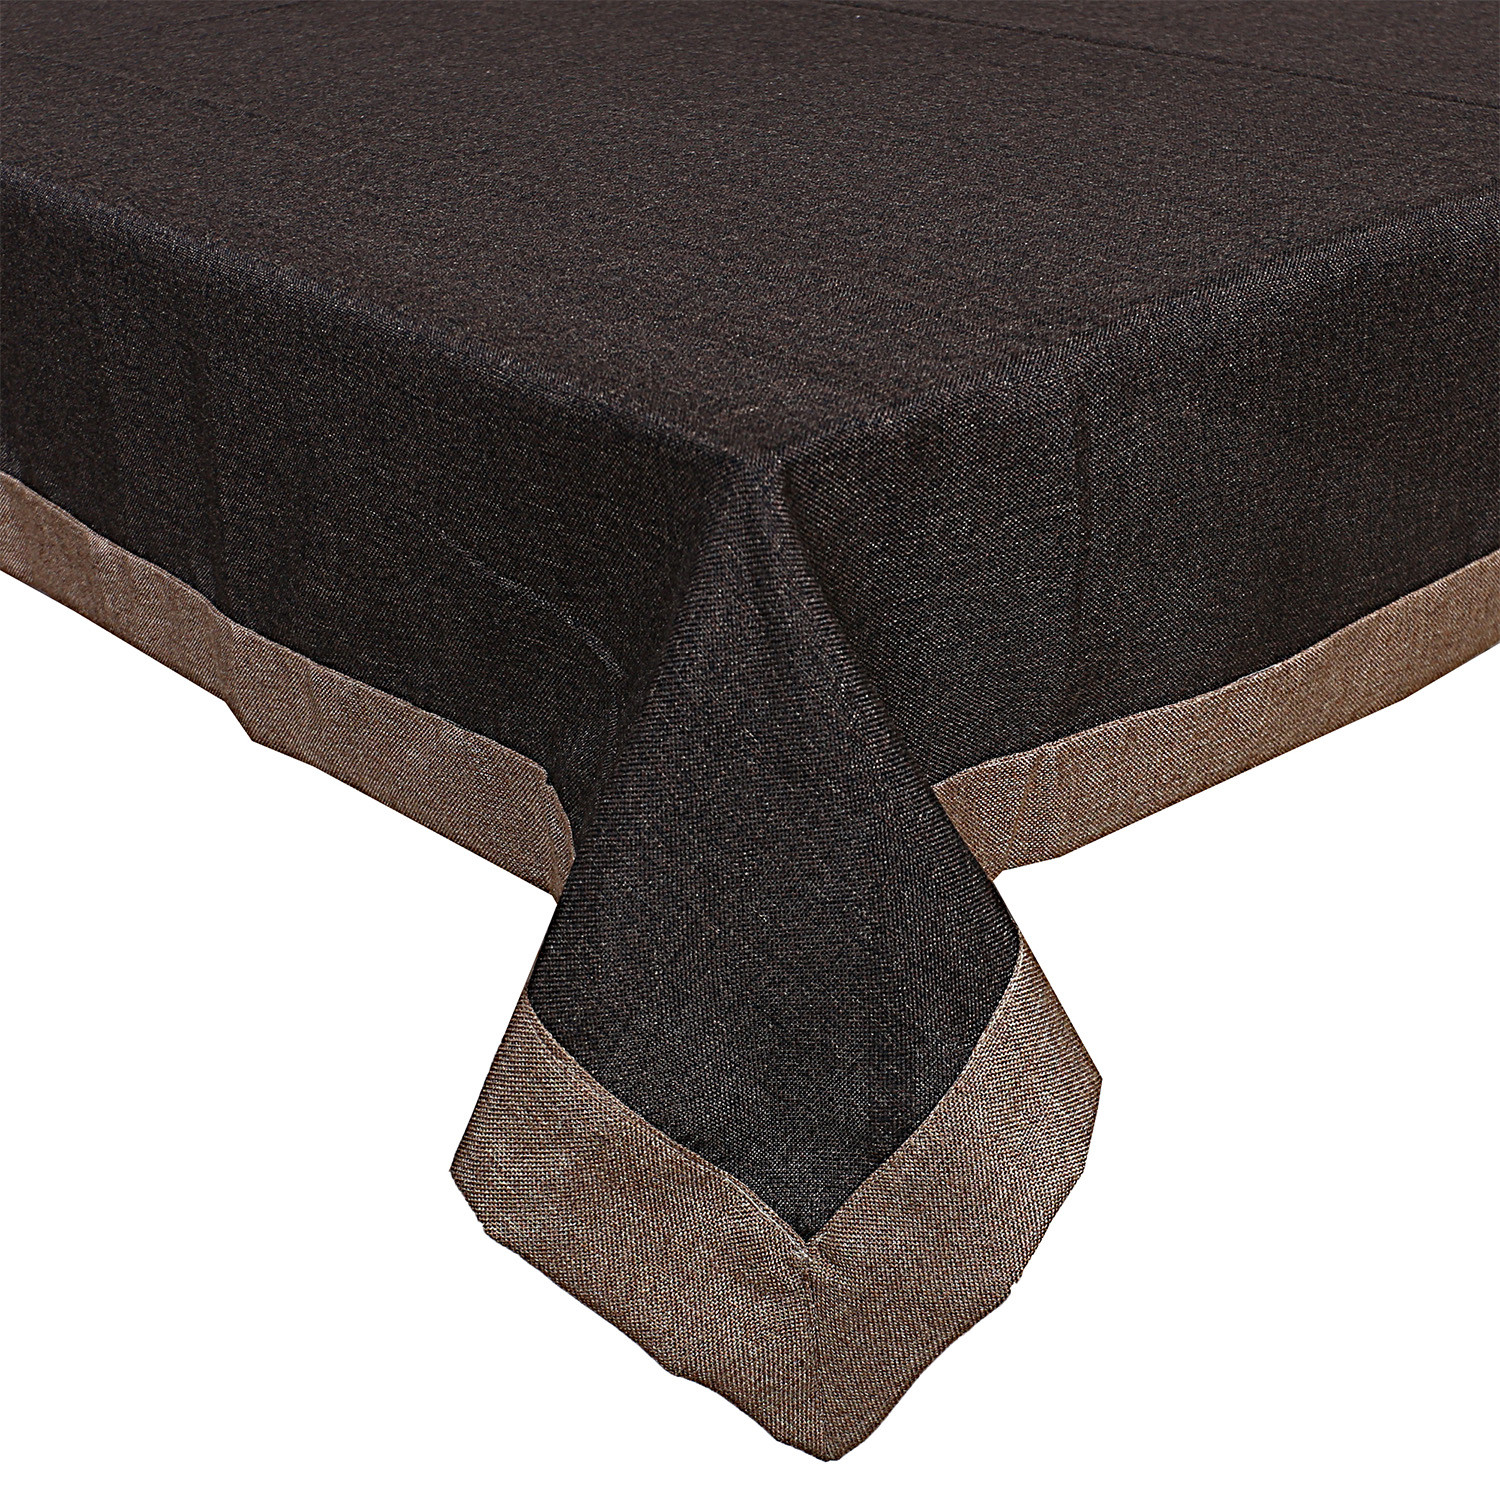 Kuber Industries Dining Table Cover|Jute Spill Proof Tablecloth|Kitchen Dinning Protector With Jutelace Border, 60X90 Inch (Brown)